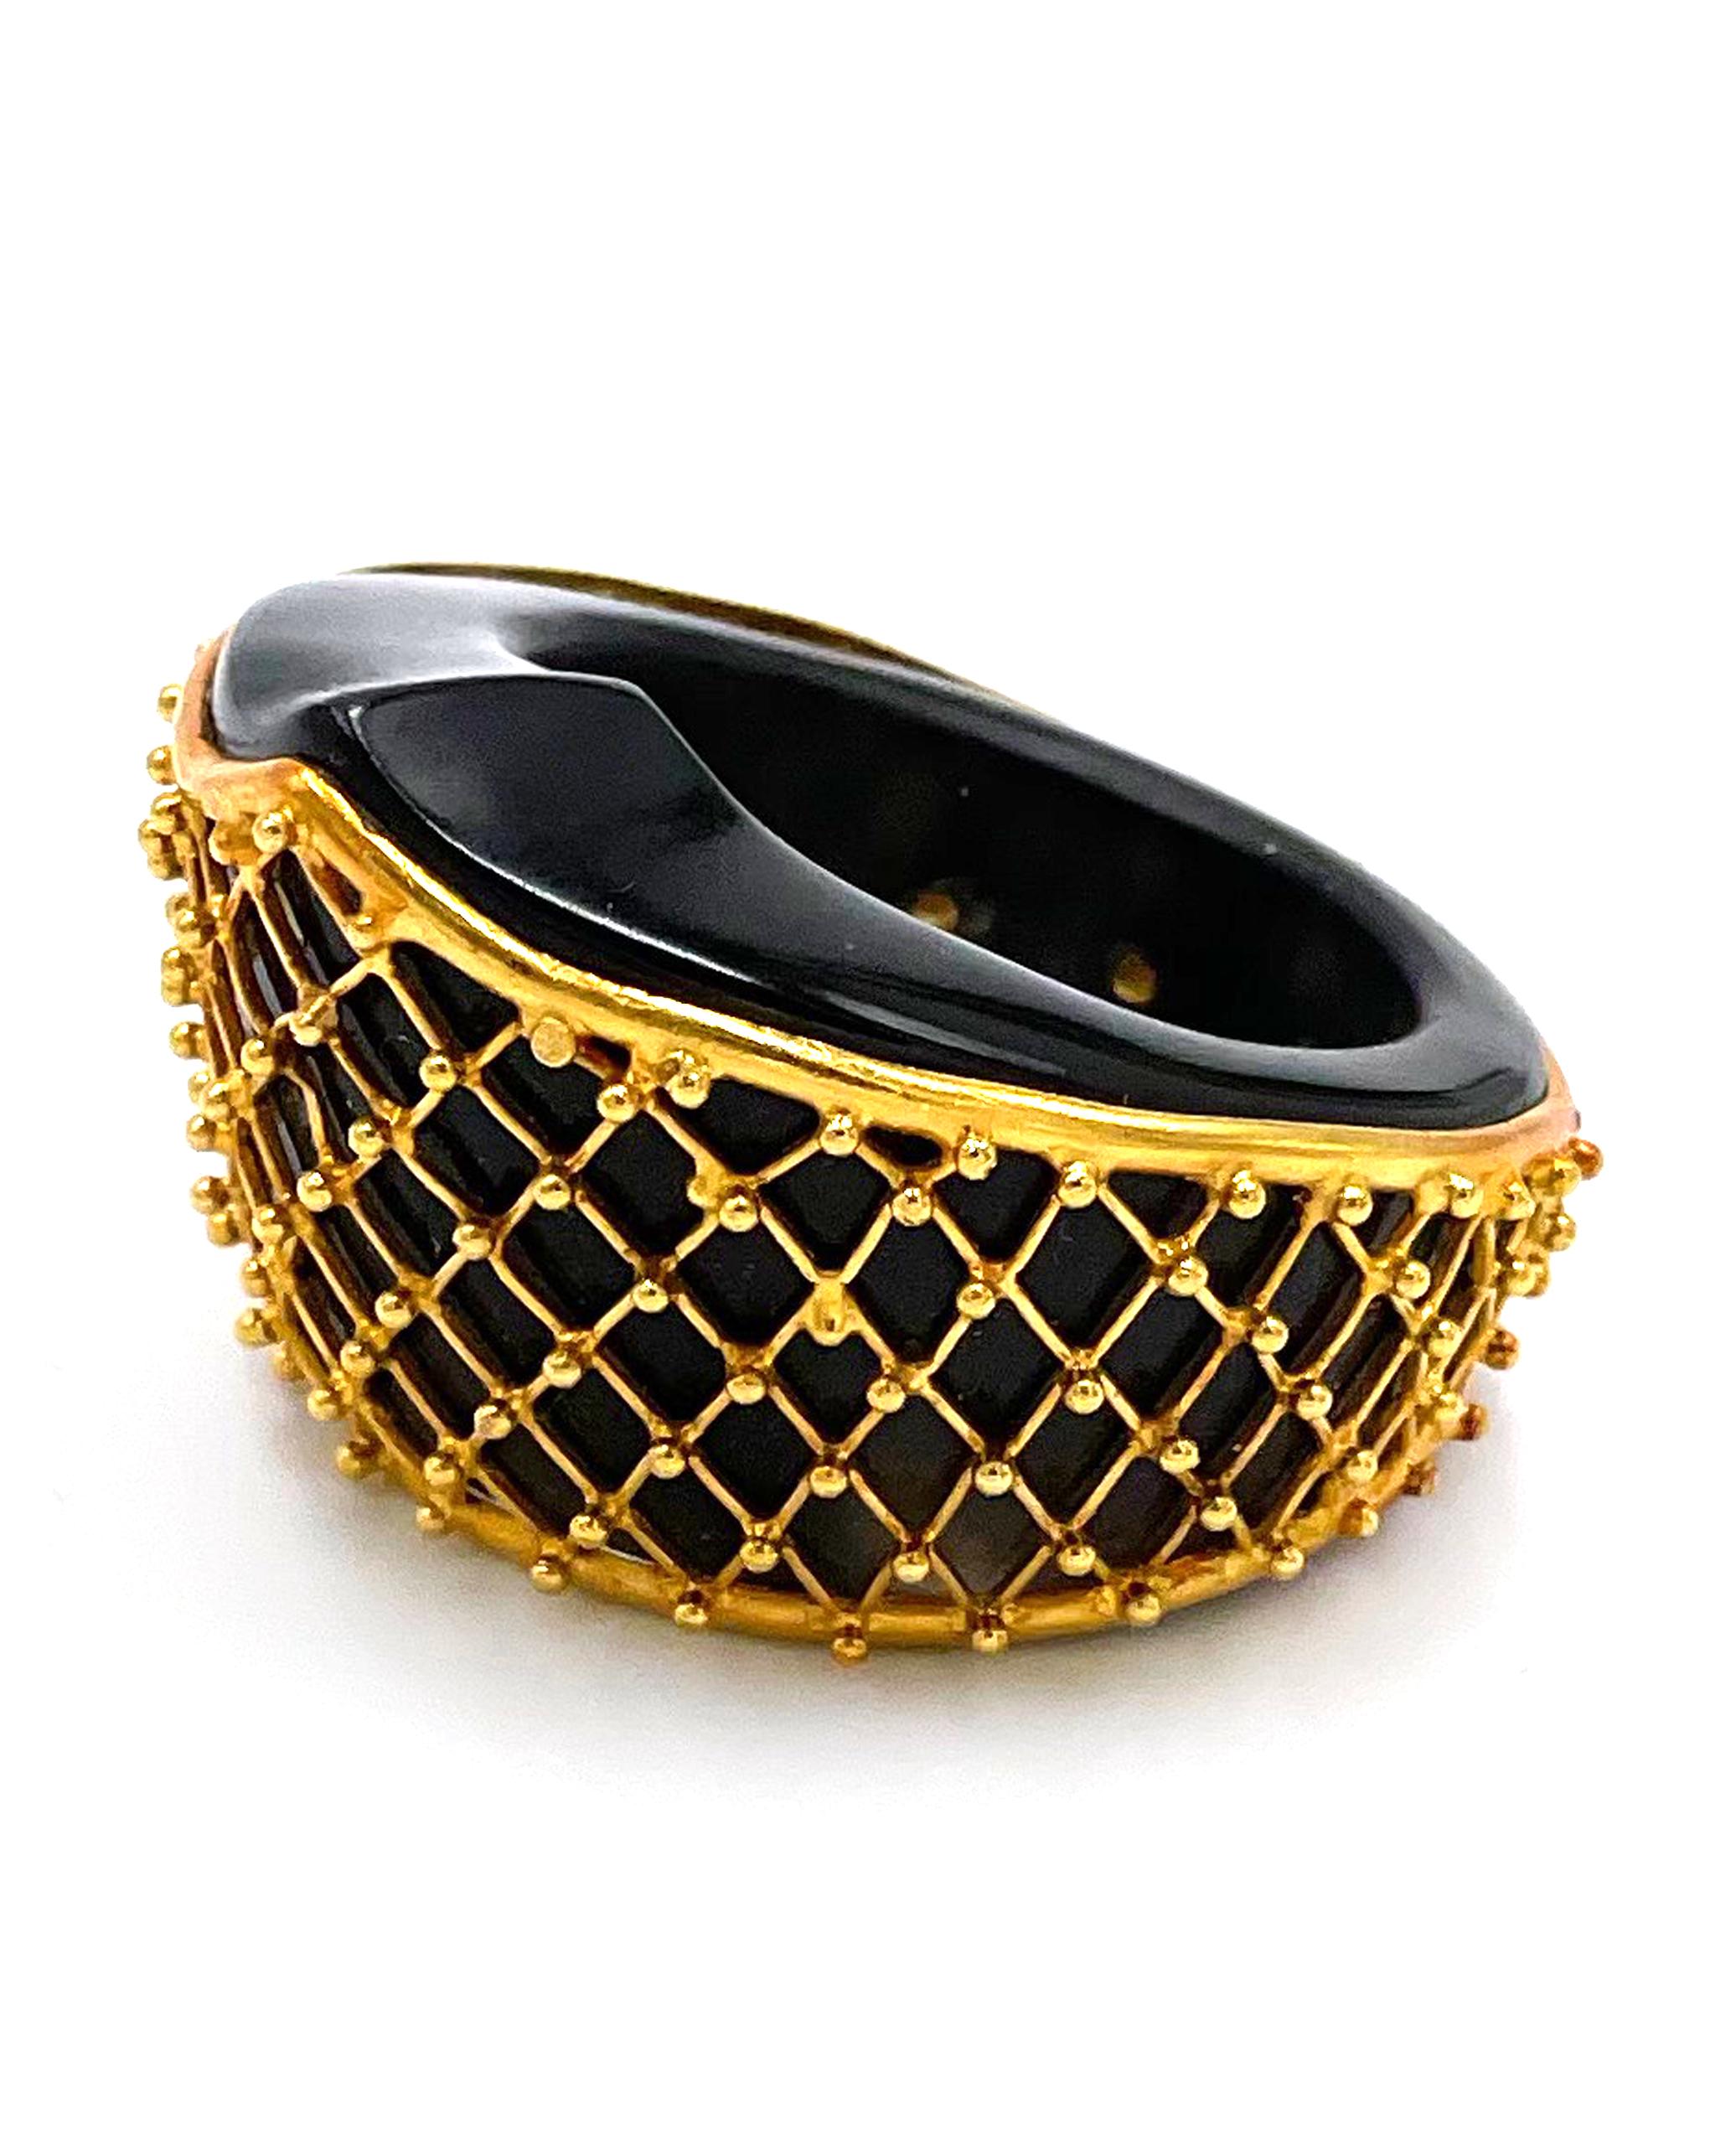 Women's Ilias Lalaounis Black Glass Ring with 18K Yellow Gold Netting Detail For Sale